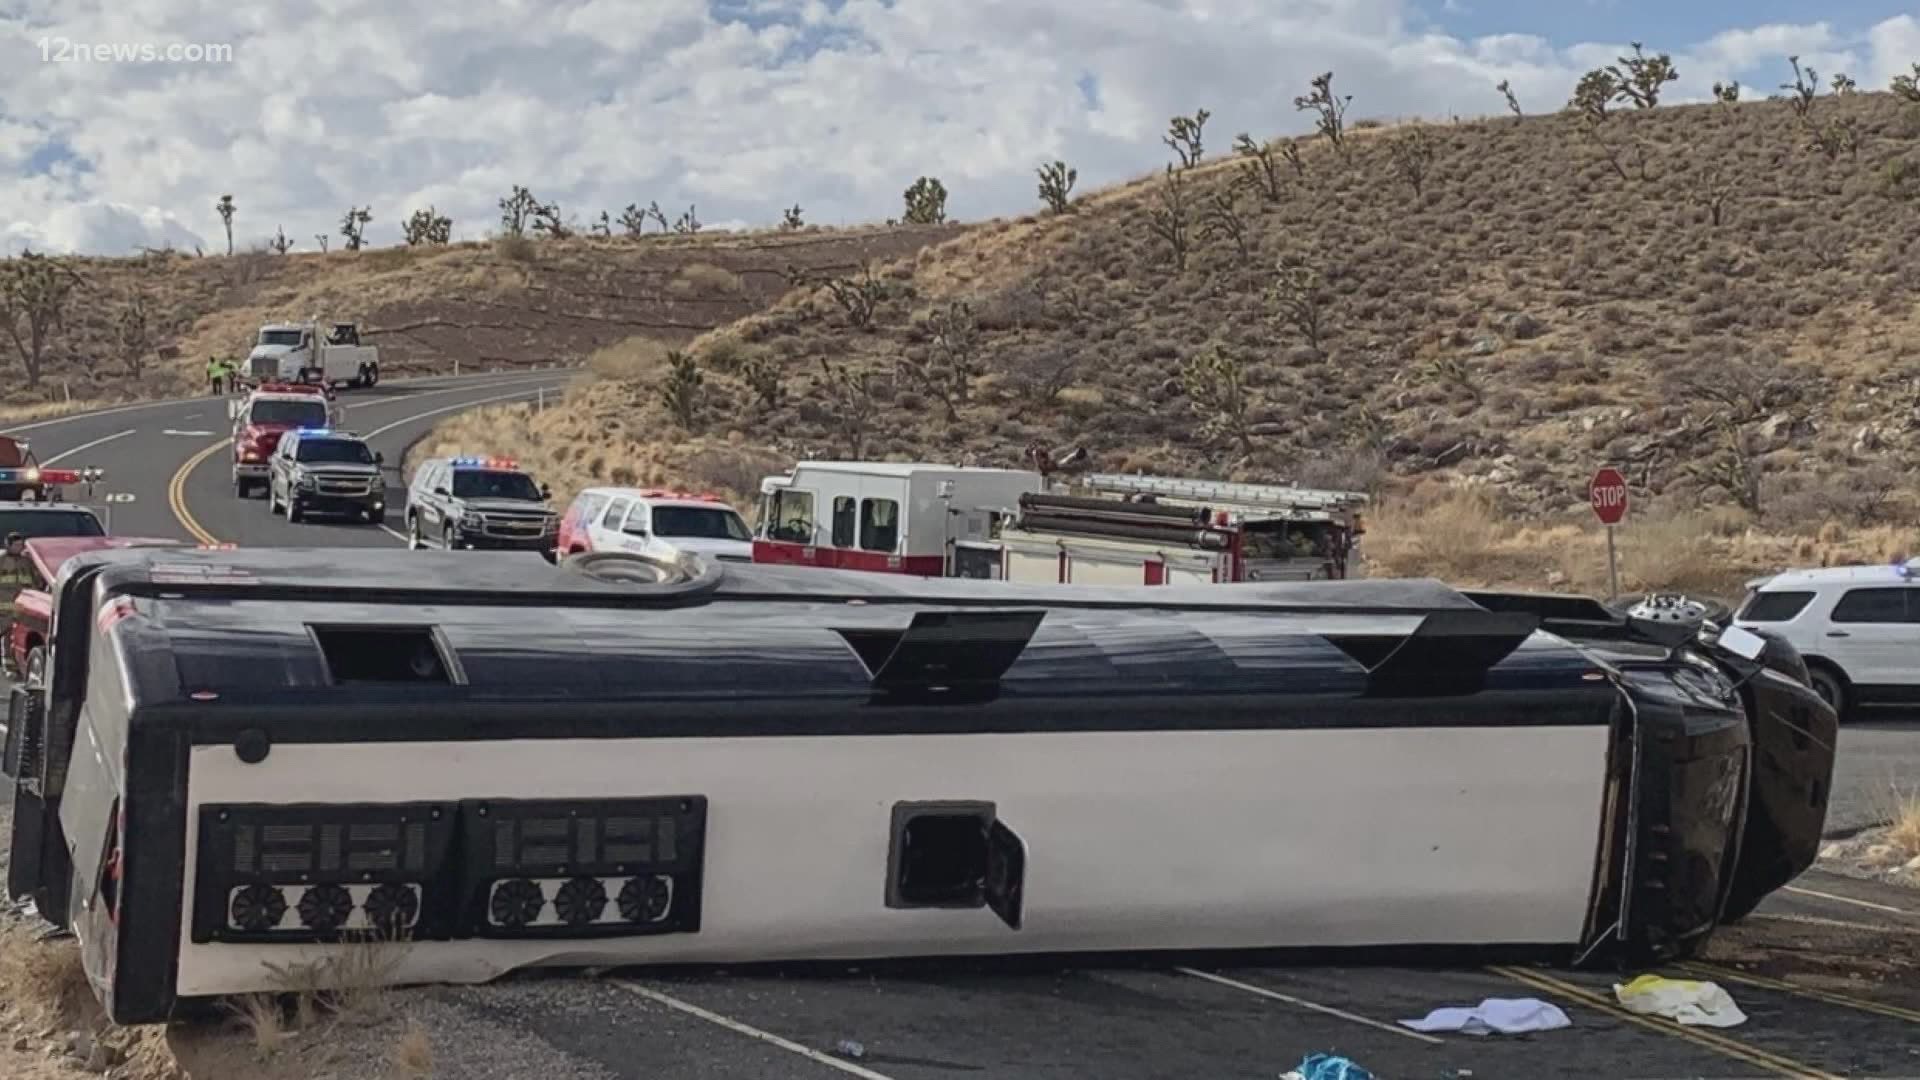 One person is dead and scores of others were injured after a tour bus heading towards the Grand Canyon crashed Friday afternoon.